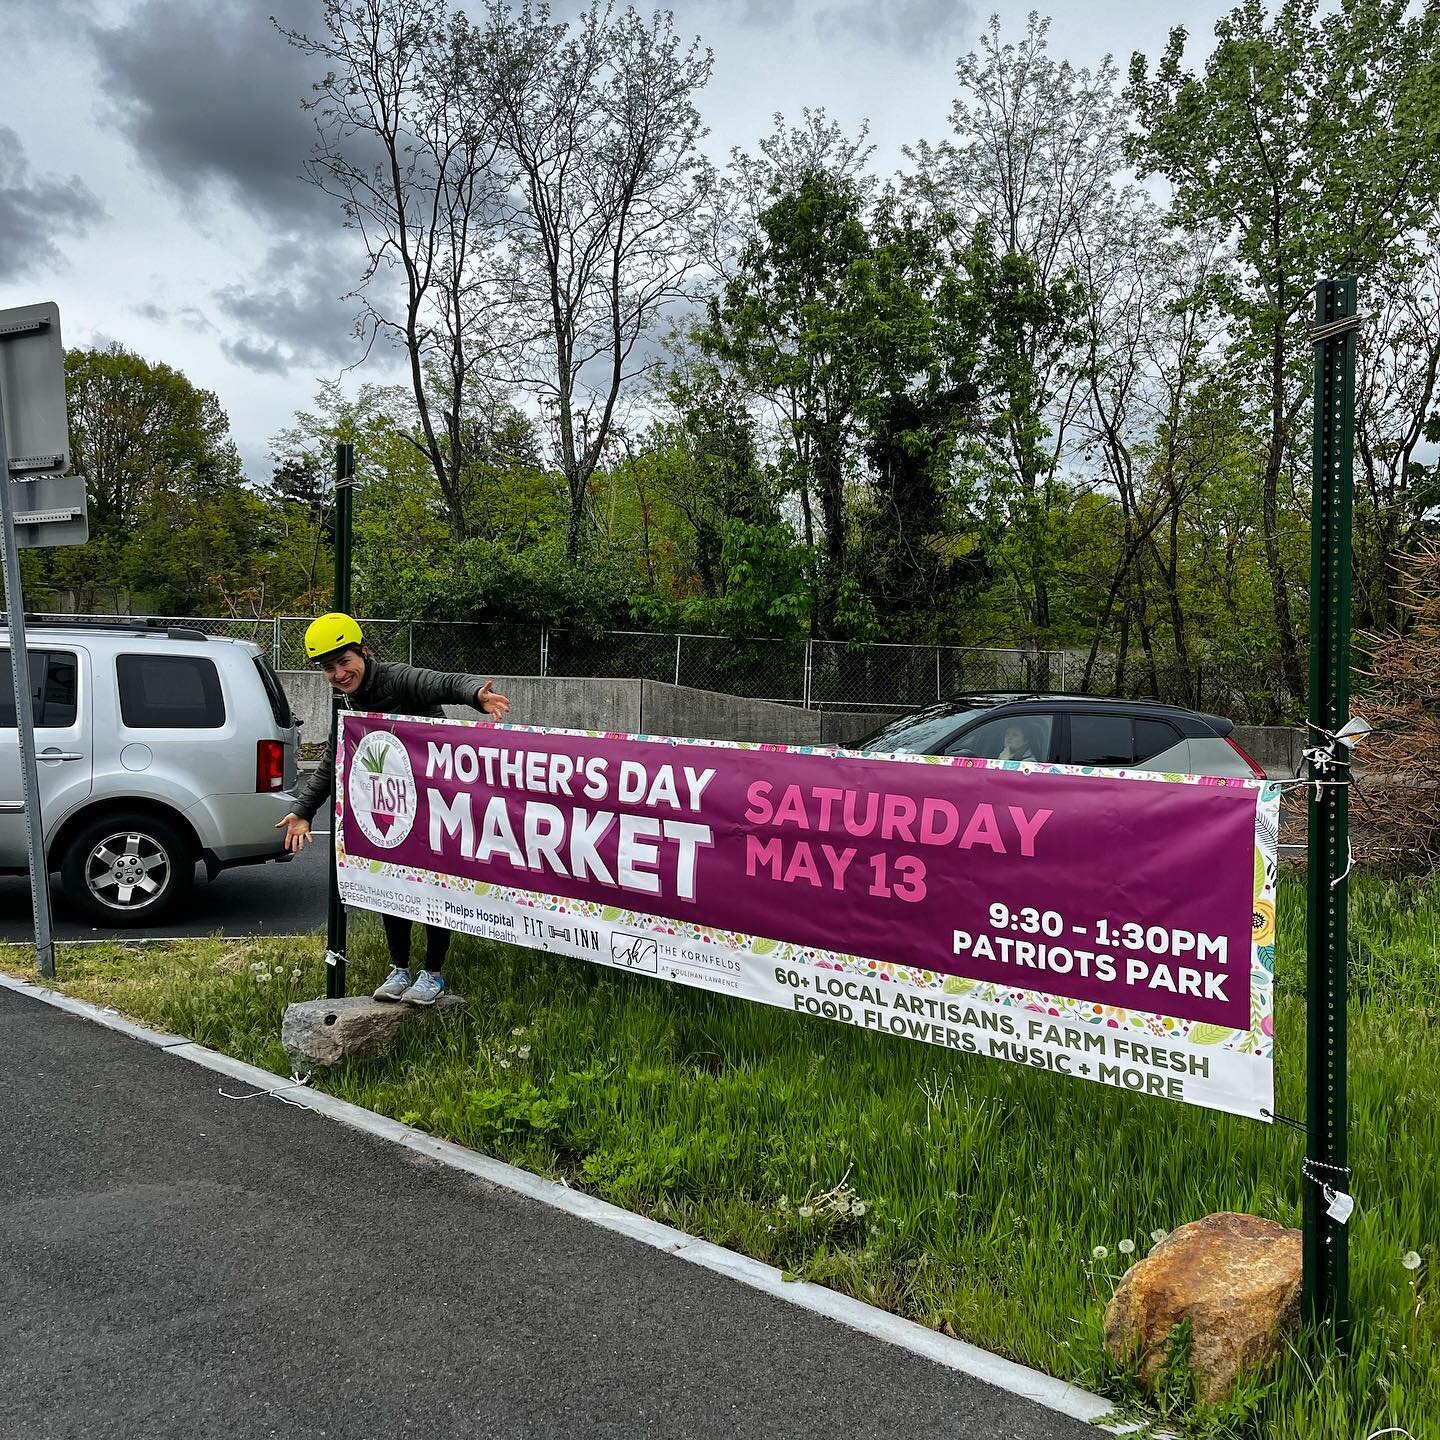 Thanks to TaSH shopper @kikobuff for helping us hang our latest sign! Who better than a fellow Mom to help spread the word about next weekend&rsquo;s Mother&rsquo;s Day market!? We&rsquo;ve got 60+ vendors lined up (a new record) and will be sharing 